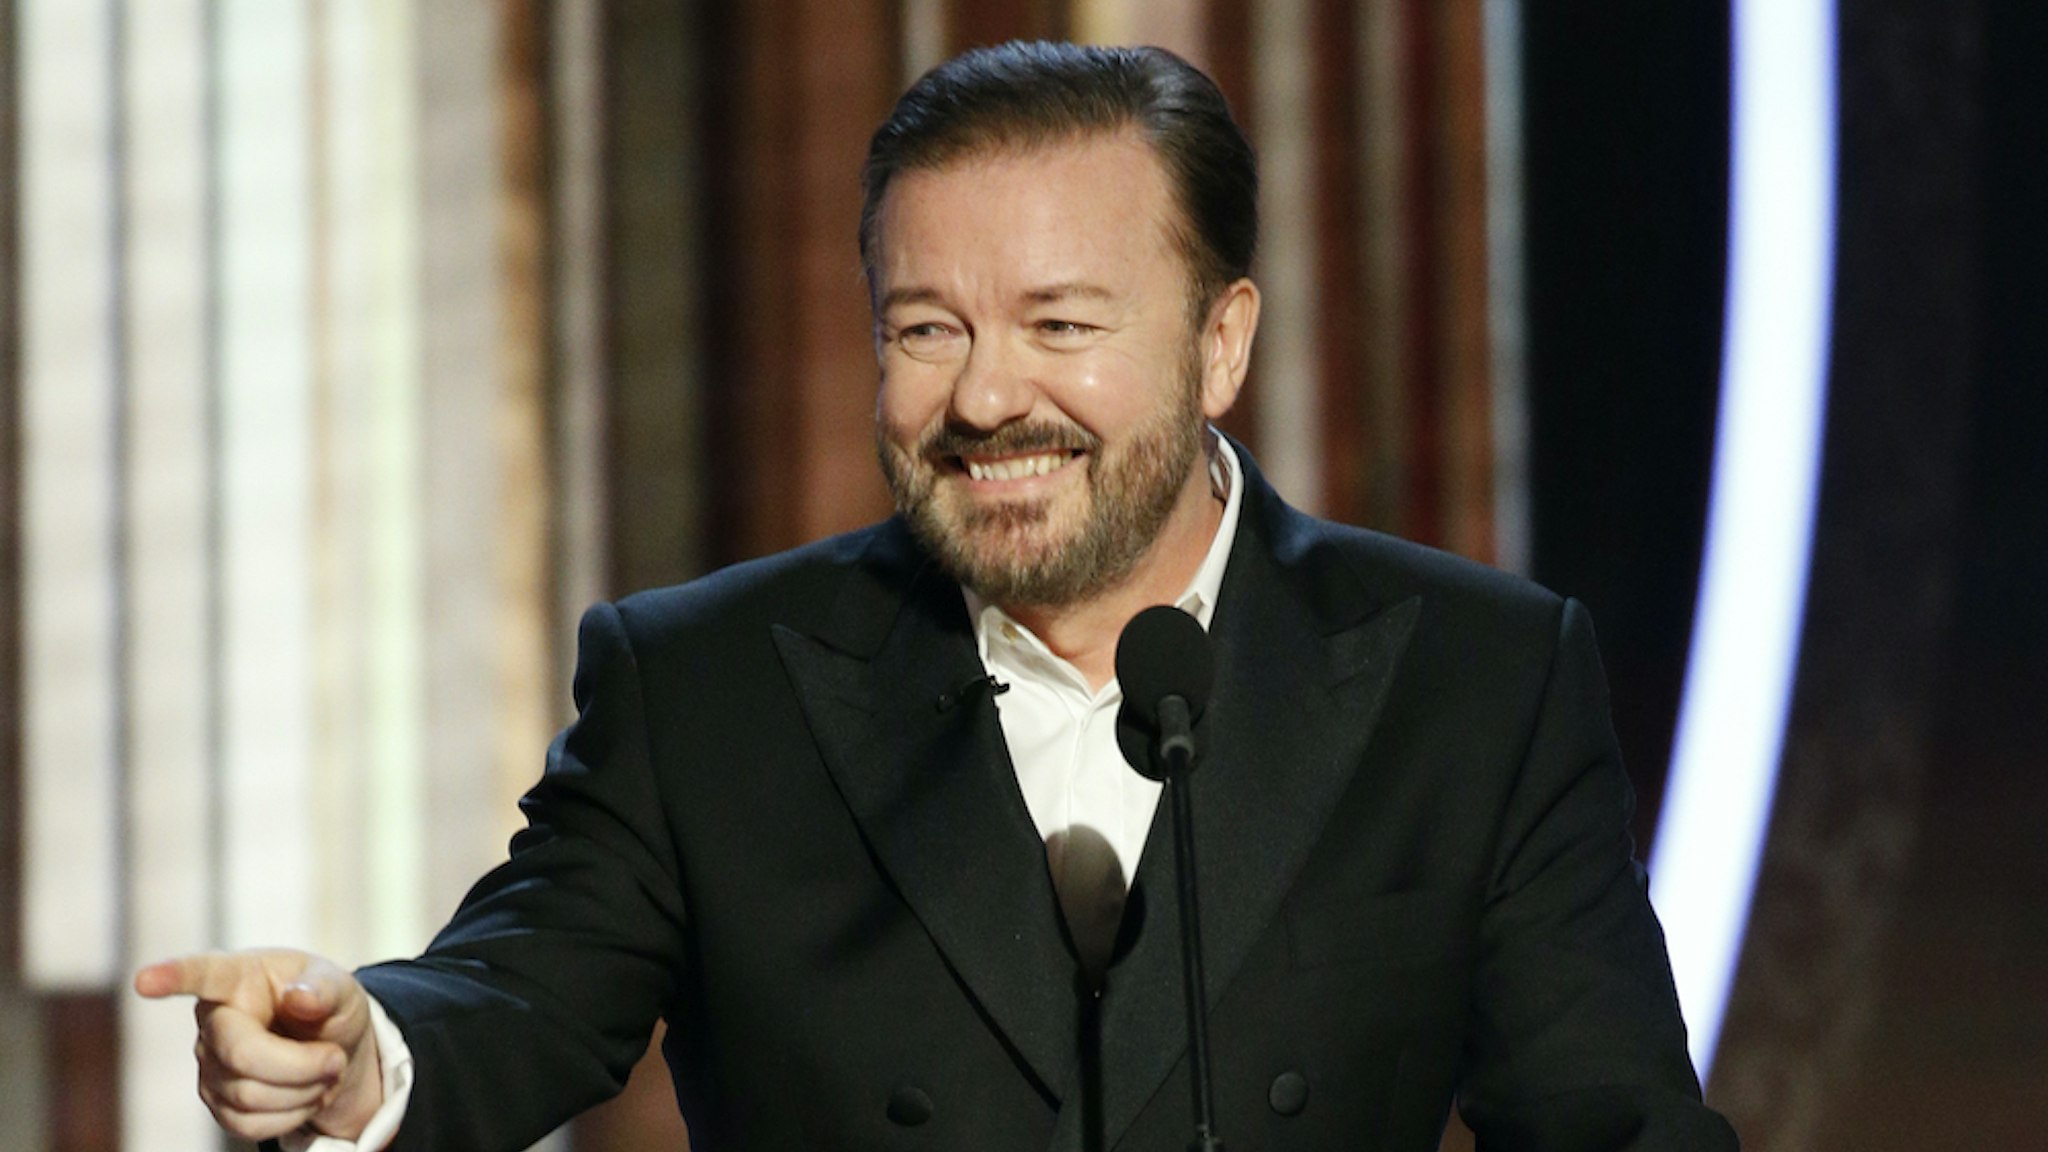 n this handout photo provided by NBCUniversal Media, LLC, host Ricky Gervais speaks onstage during the 77th Annual Golden Globe Awards at The Beverly Hilton Hotel on January 5, 2020 in Beverly Hills, California. (Photo by Paul Drinkwater/NBCUniversal Media, LLC via Getty Images)